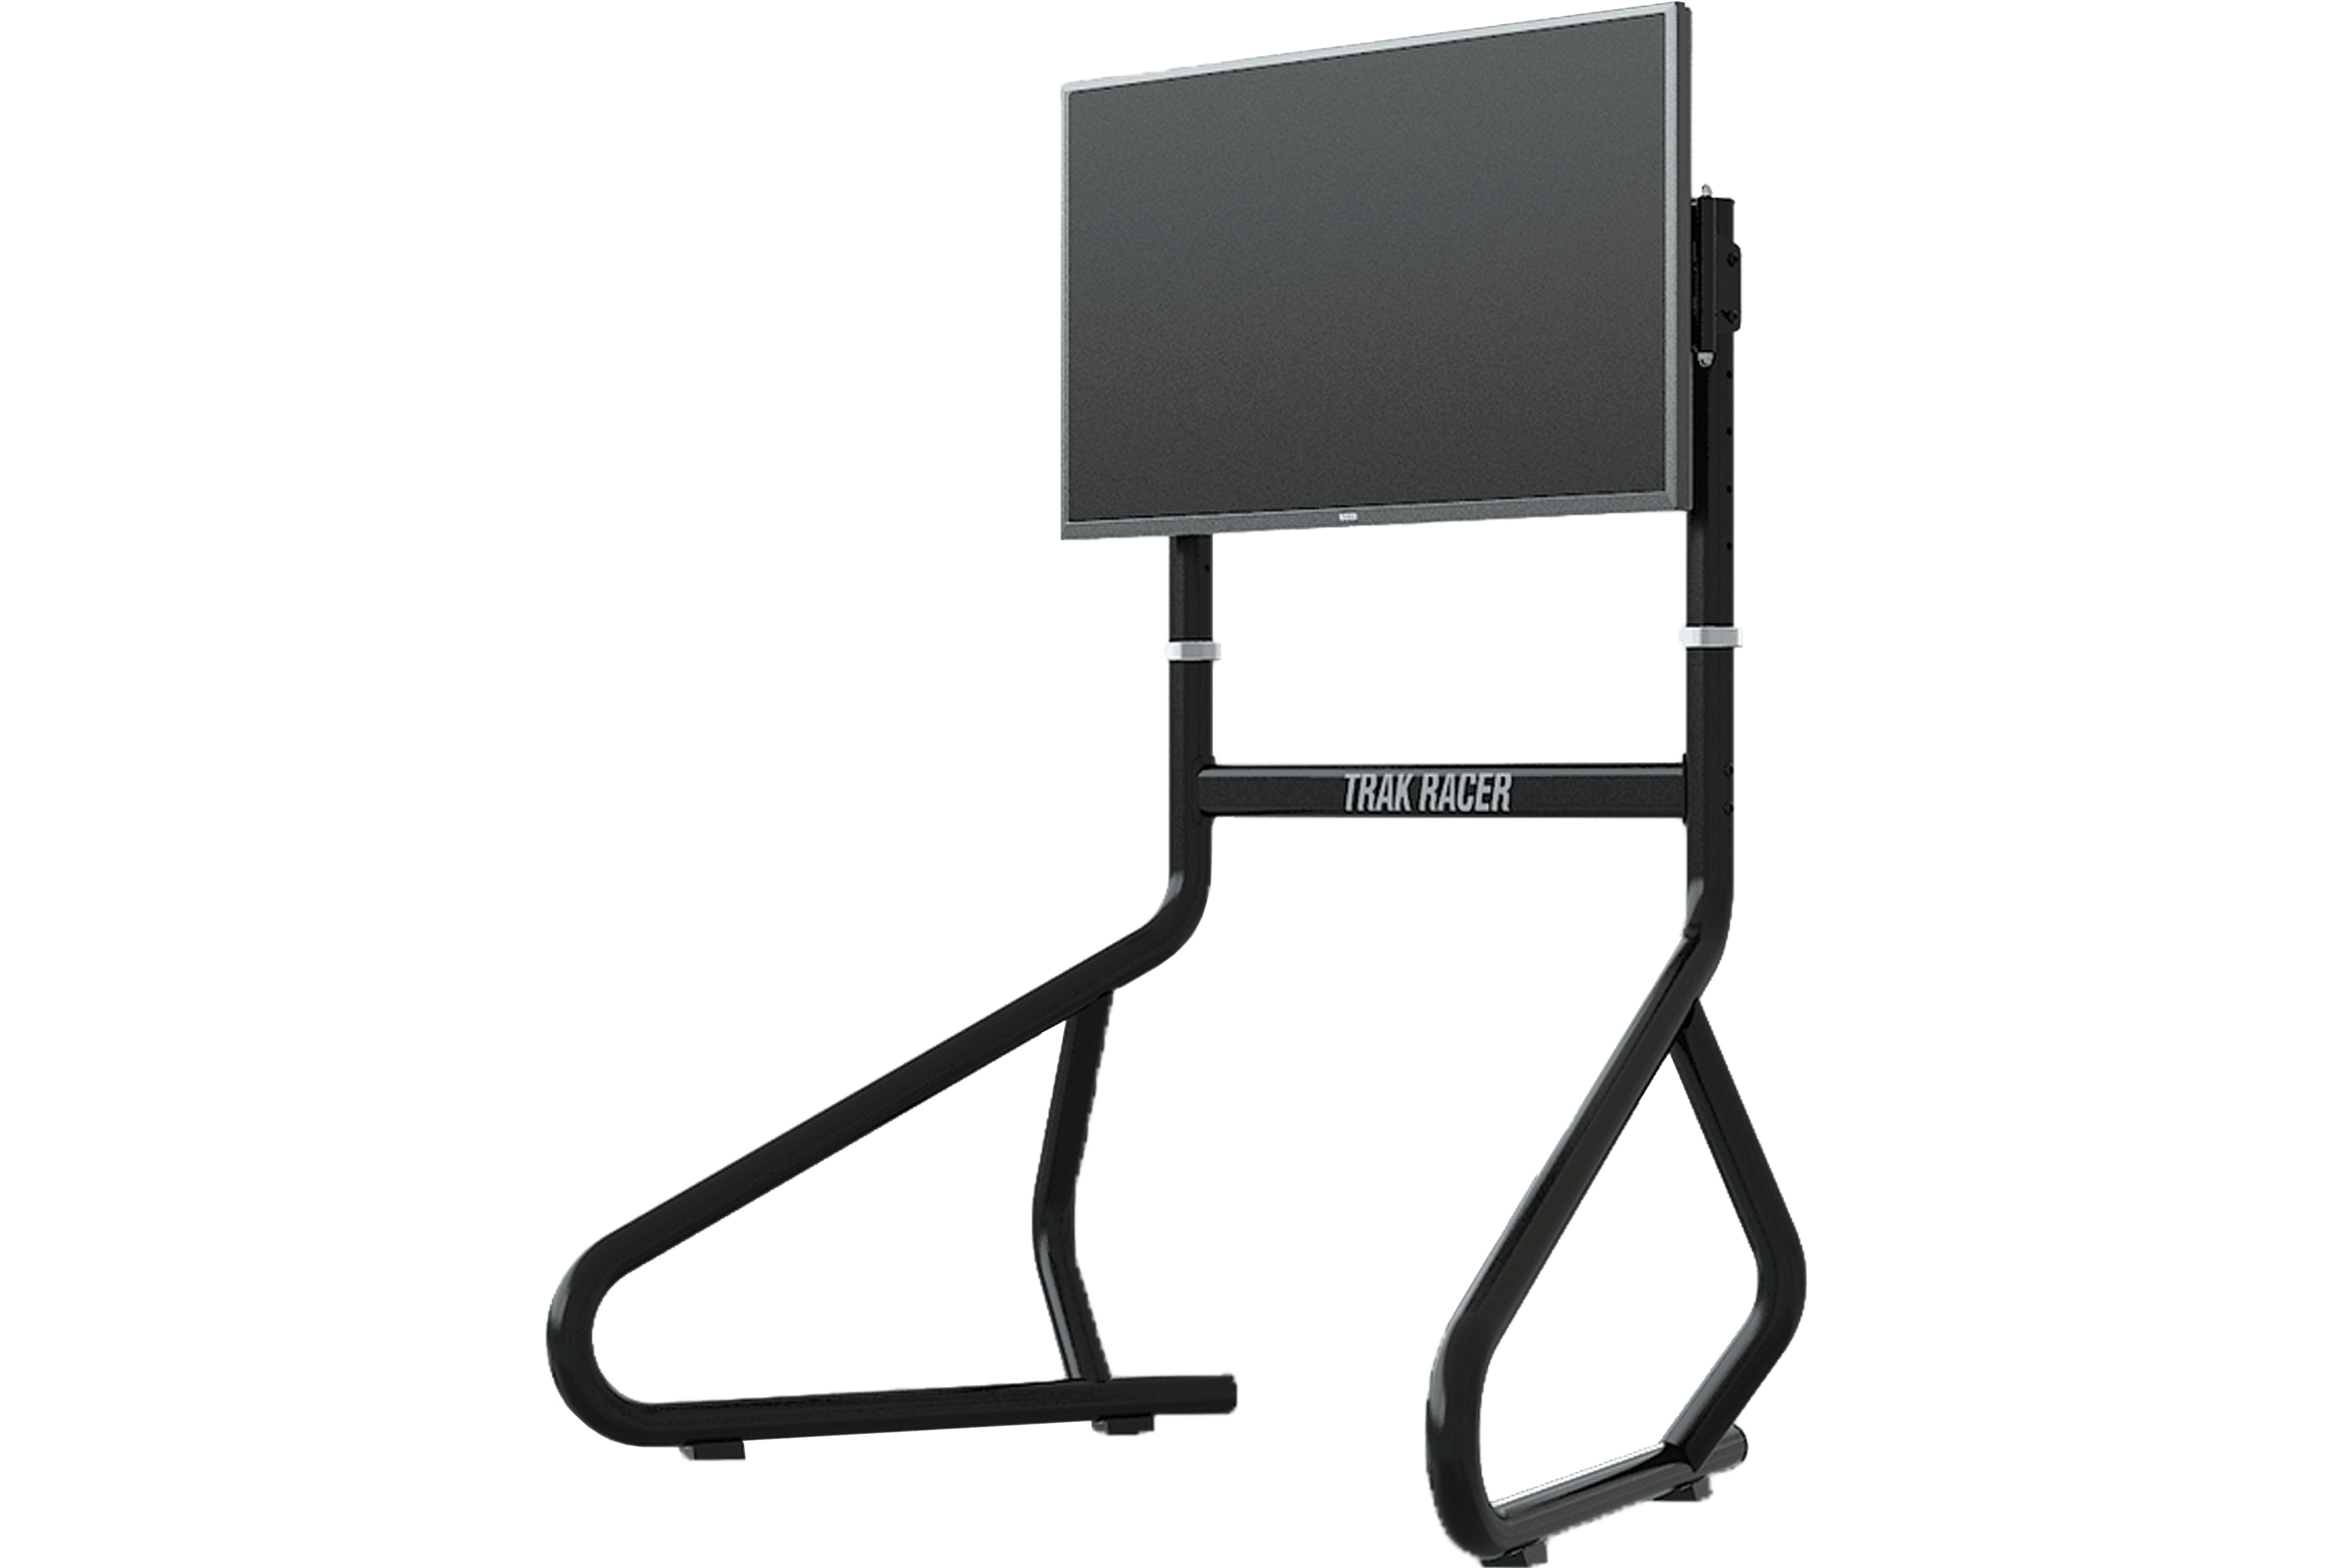 Freestanding Single Monitor Stand - 30" to 55" Display